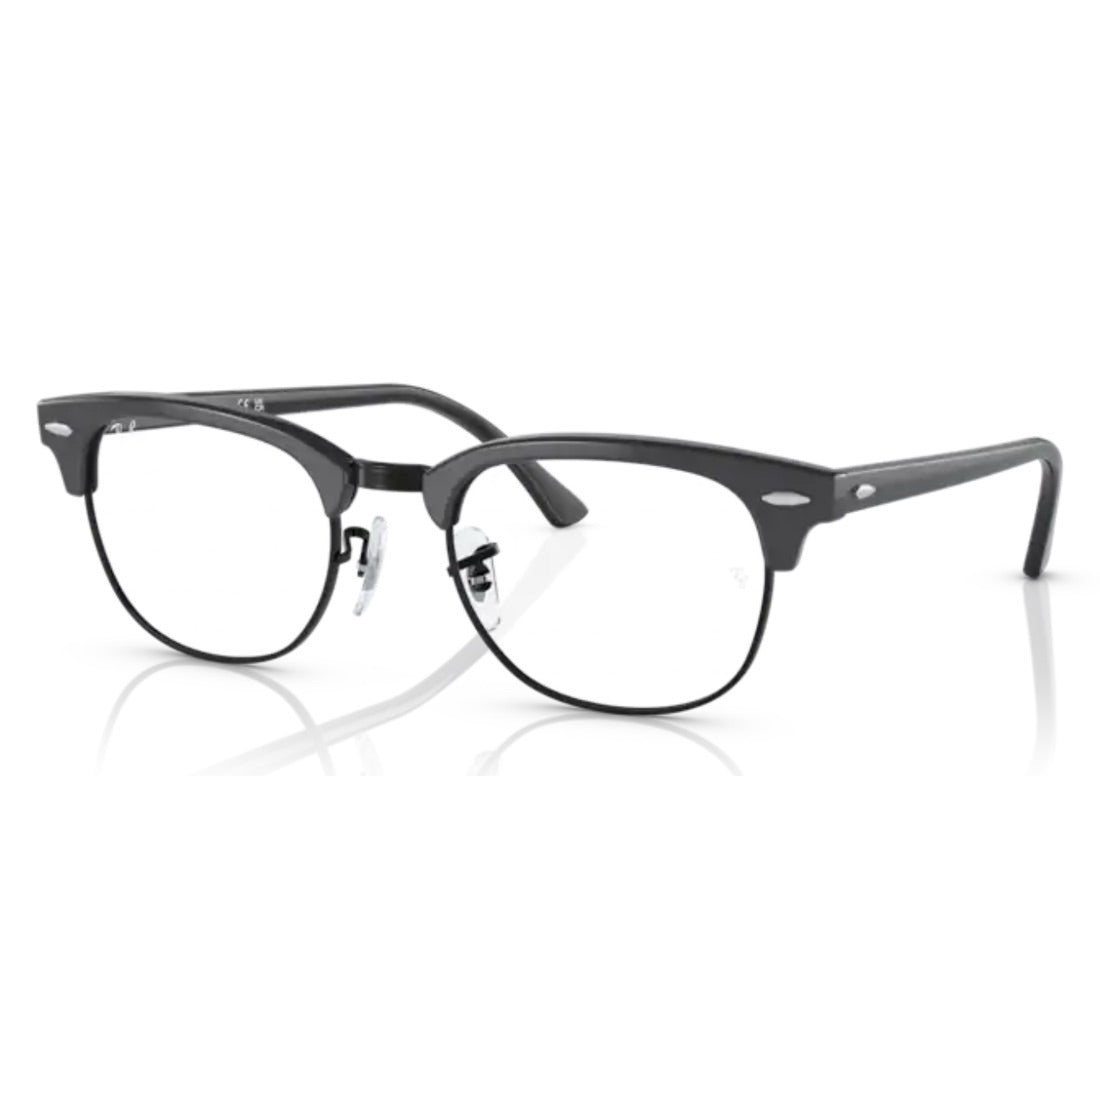 RAY-BAN - RX5154 8232 - Clubmaster - PARIS LUNETIER